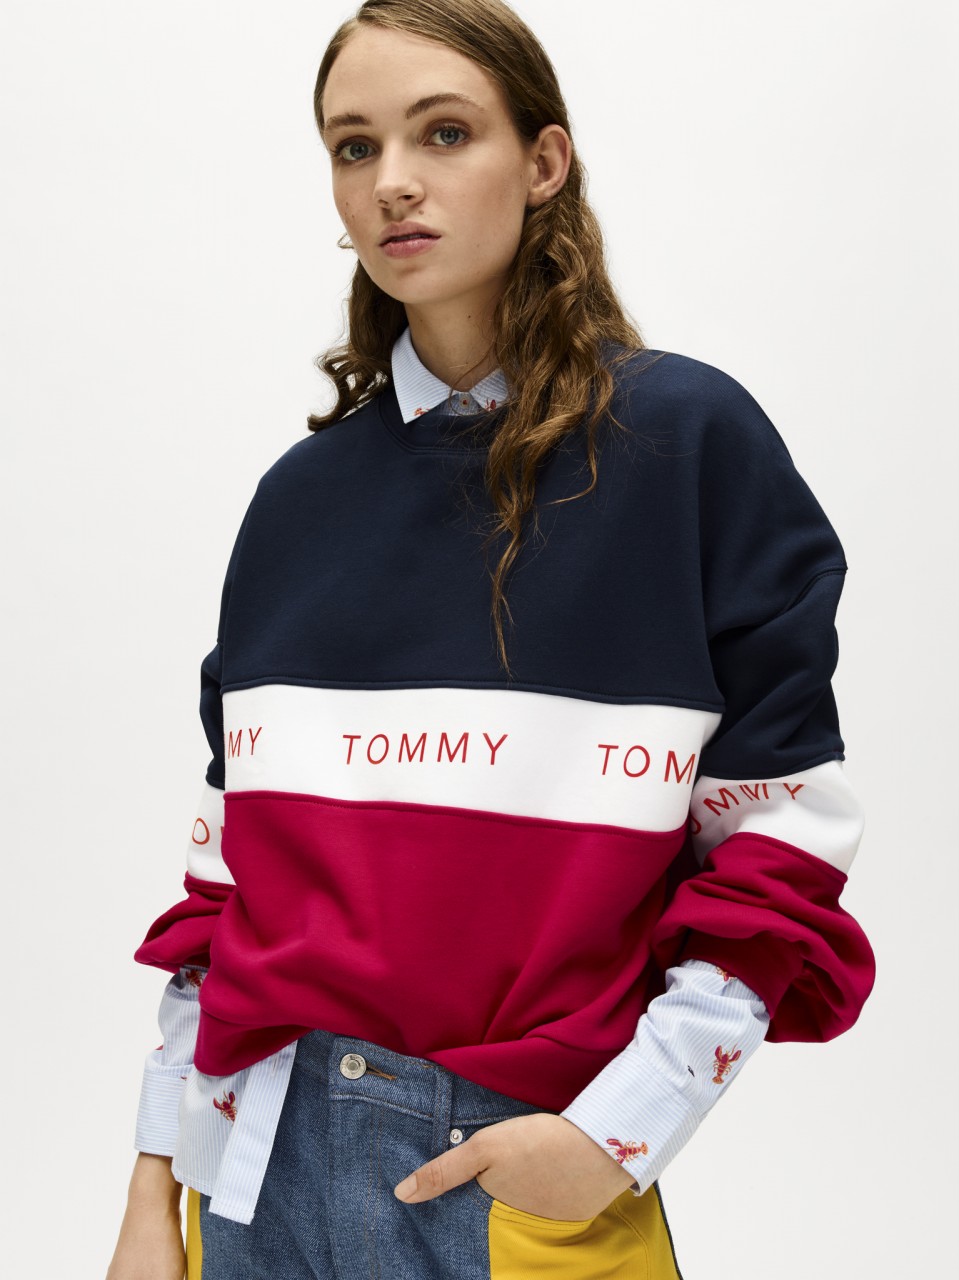 Tommy Jeans Is The New Name Of Tommy Hilfiger's Denim Label – Lipstiq.com